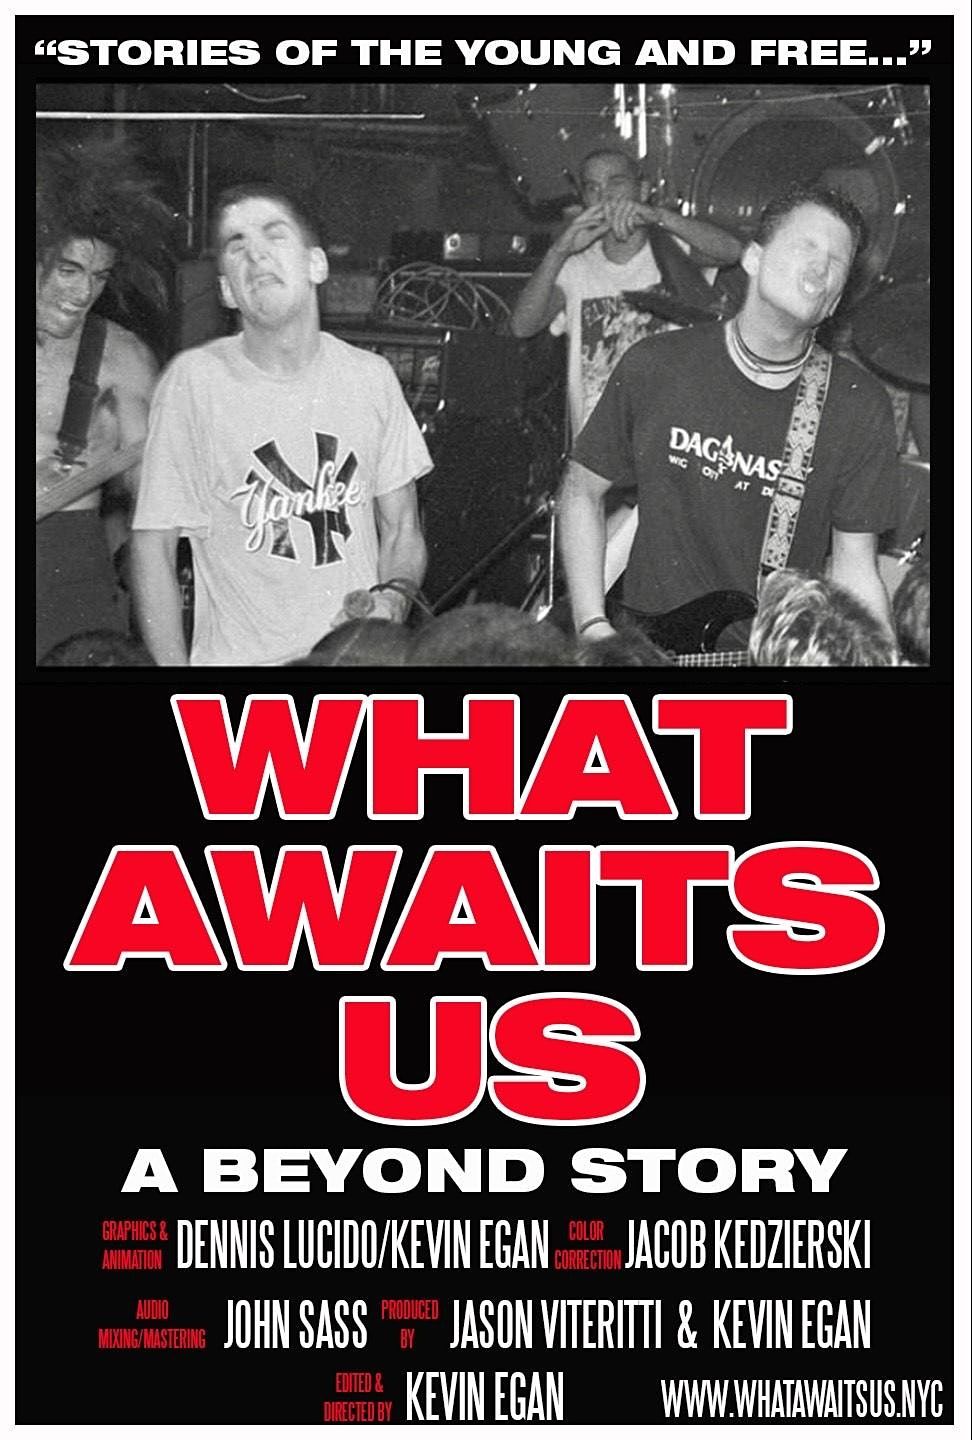 WHAT AWAITS US: A BEYOND STORY